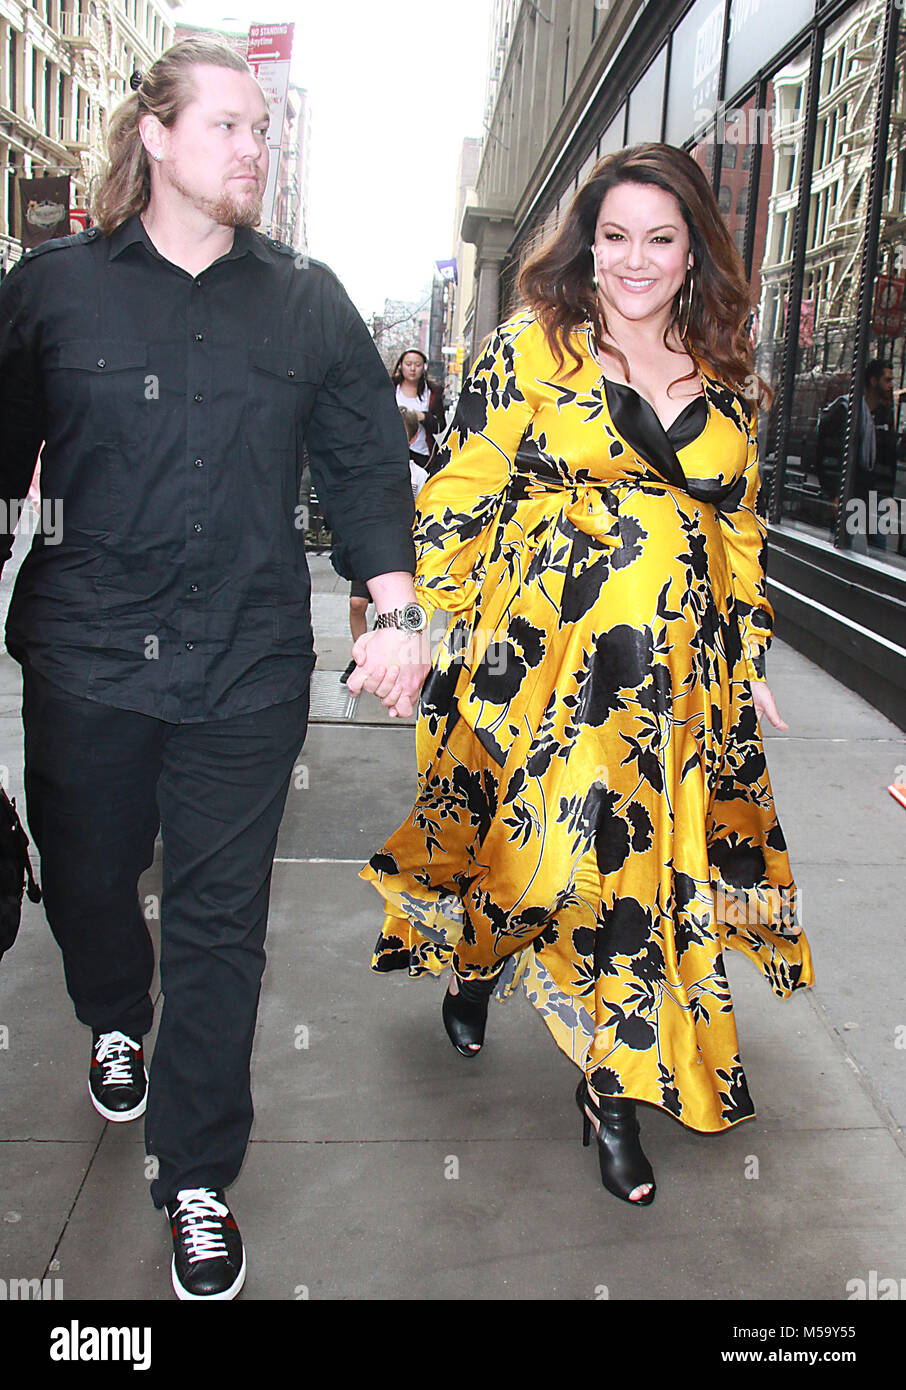 New York, NY, USA. 21st Feb, 2018. Katy Mixon with Breaux Greer at Build Series promoting American Housewife TV Series in New York City on February 21, 2018. Credit: Rw/Media Punch/Alamy Live News Stock Photo